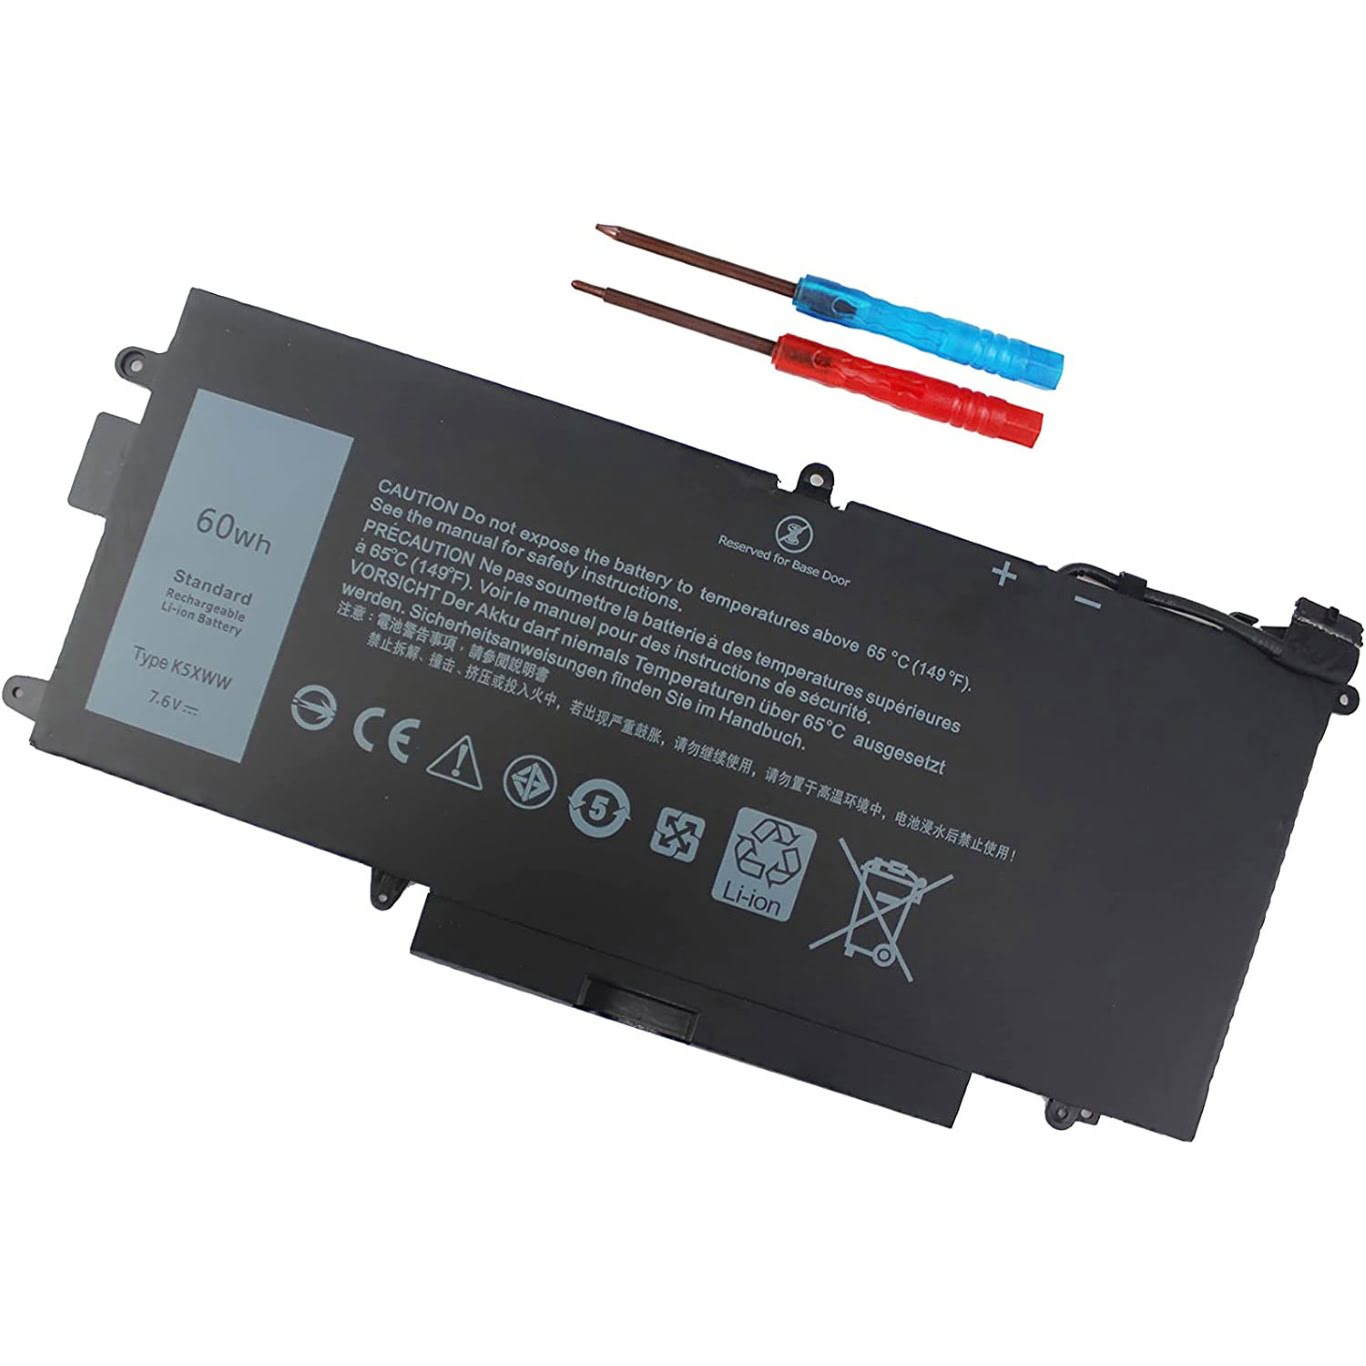 0725KY, 0CFX97 replacement Laptop Battery for Dell Latitude 12 5289, Latitude 12 5289 2 IN 1, 7.6V, 60wh